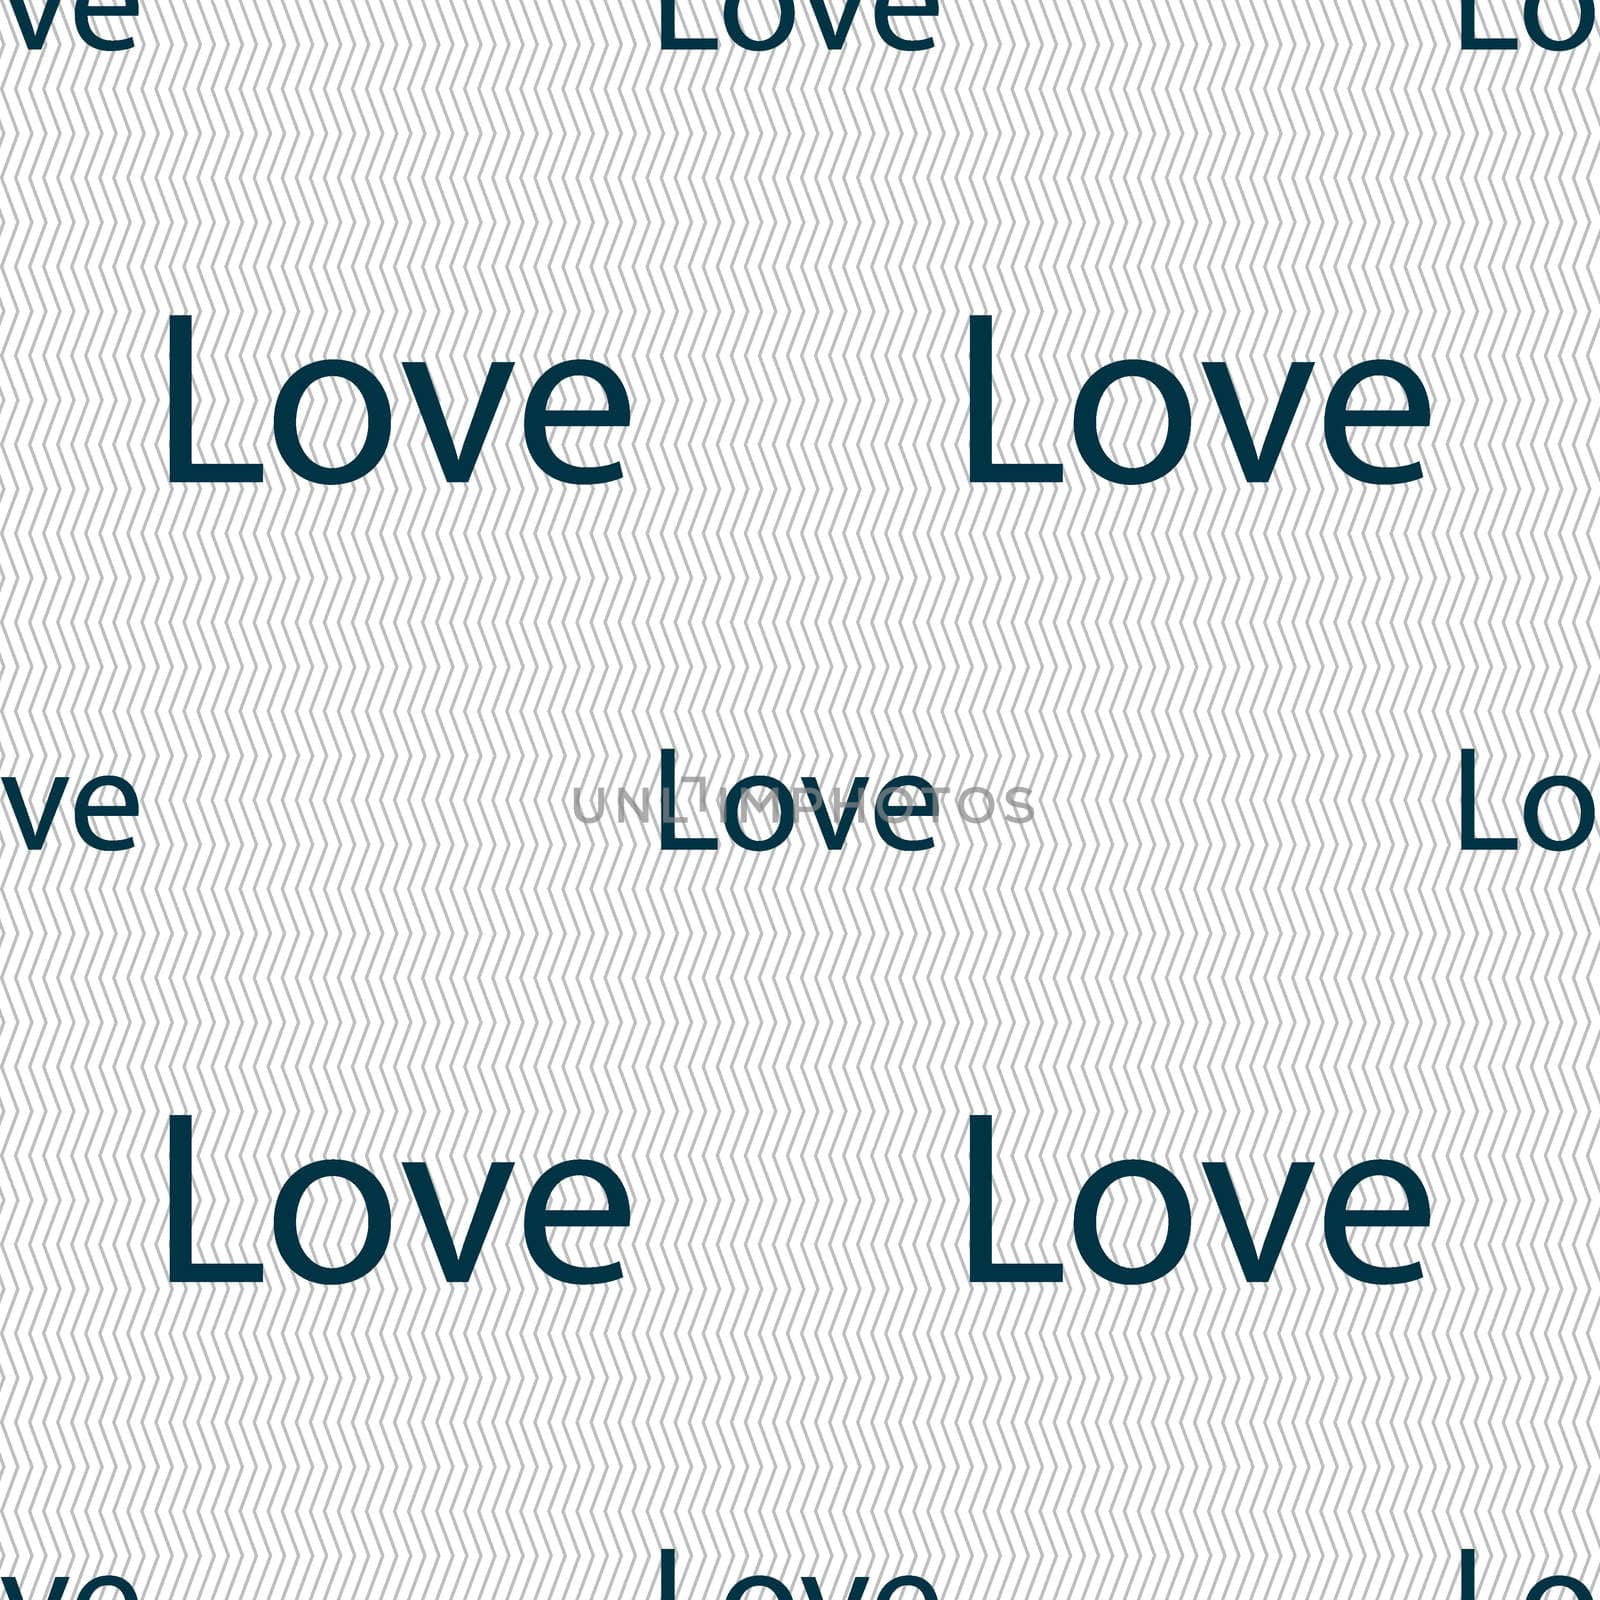 Love you sign icon. Valentines day symbol. Seamless abstract background with geometric shapes.  by serhii_lohvyniuk